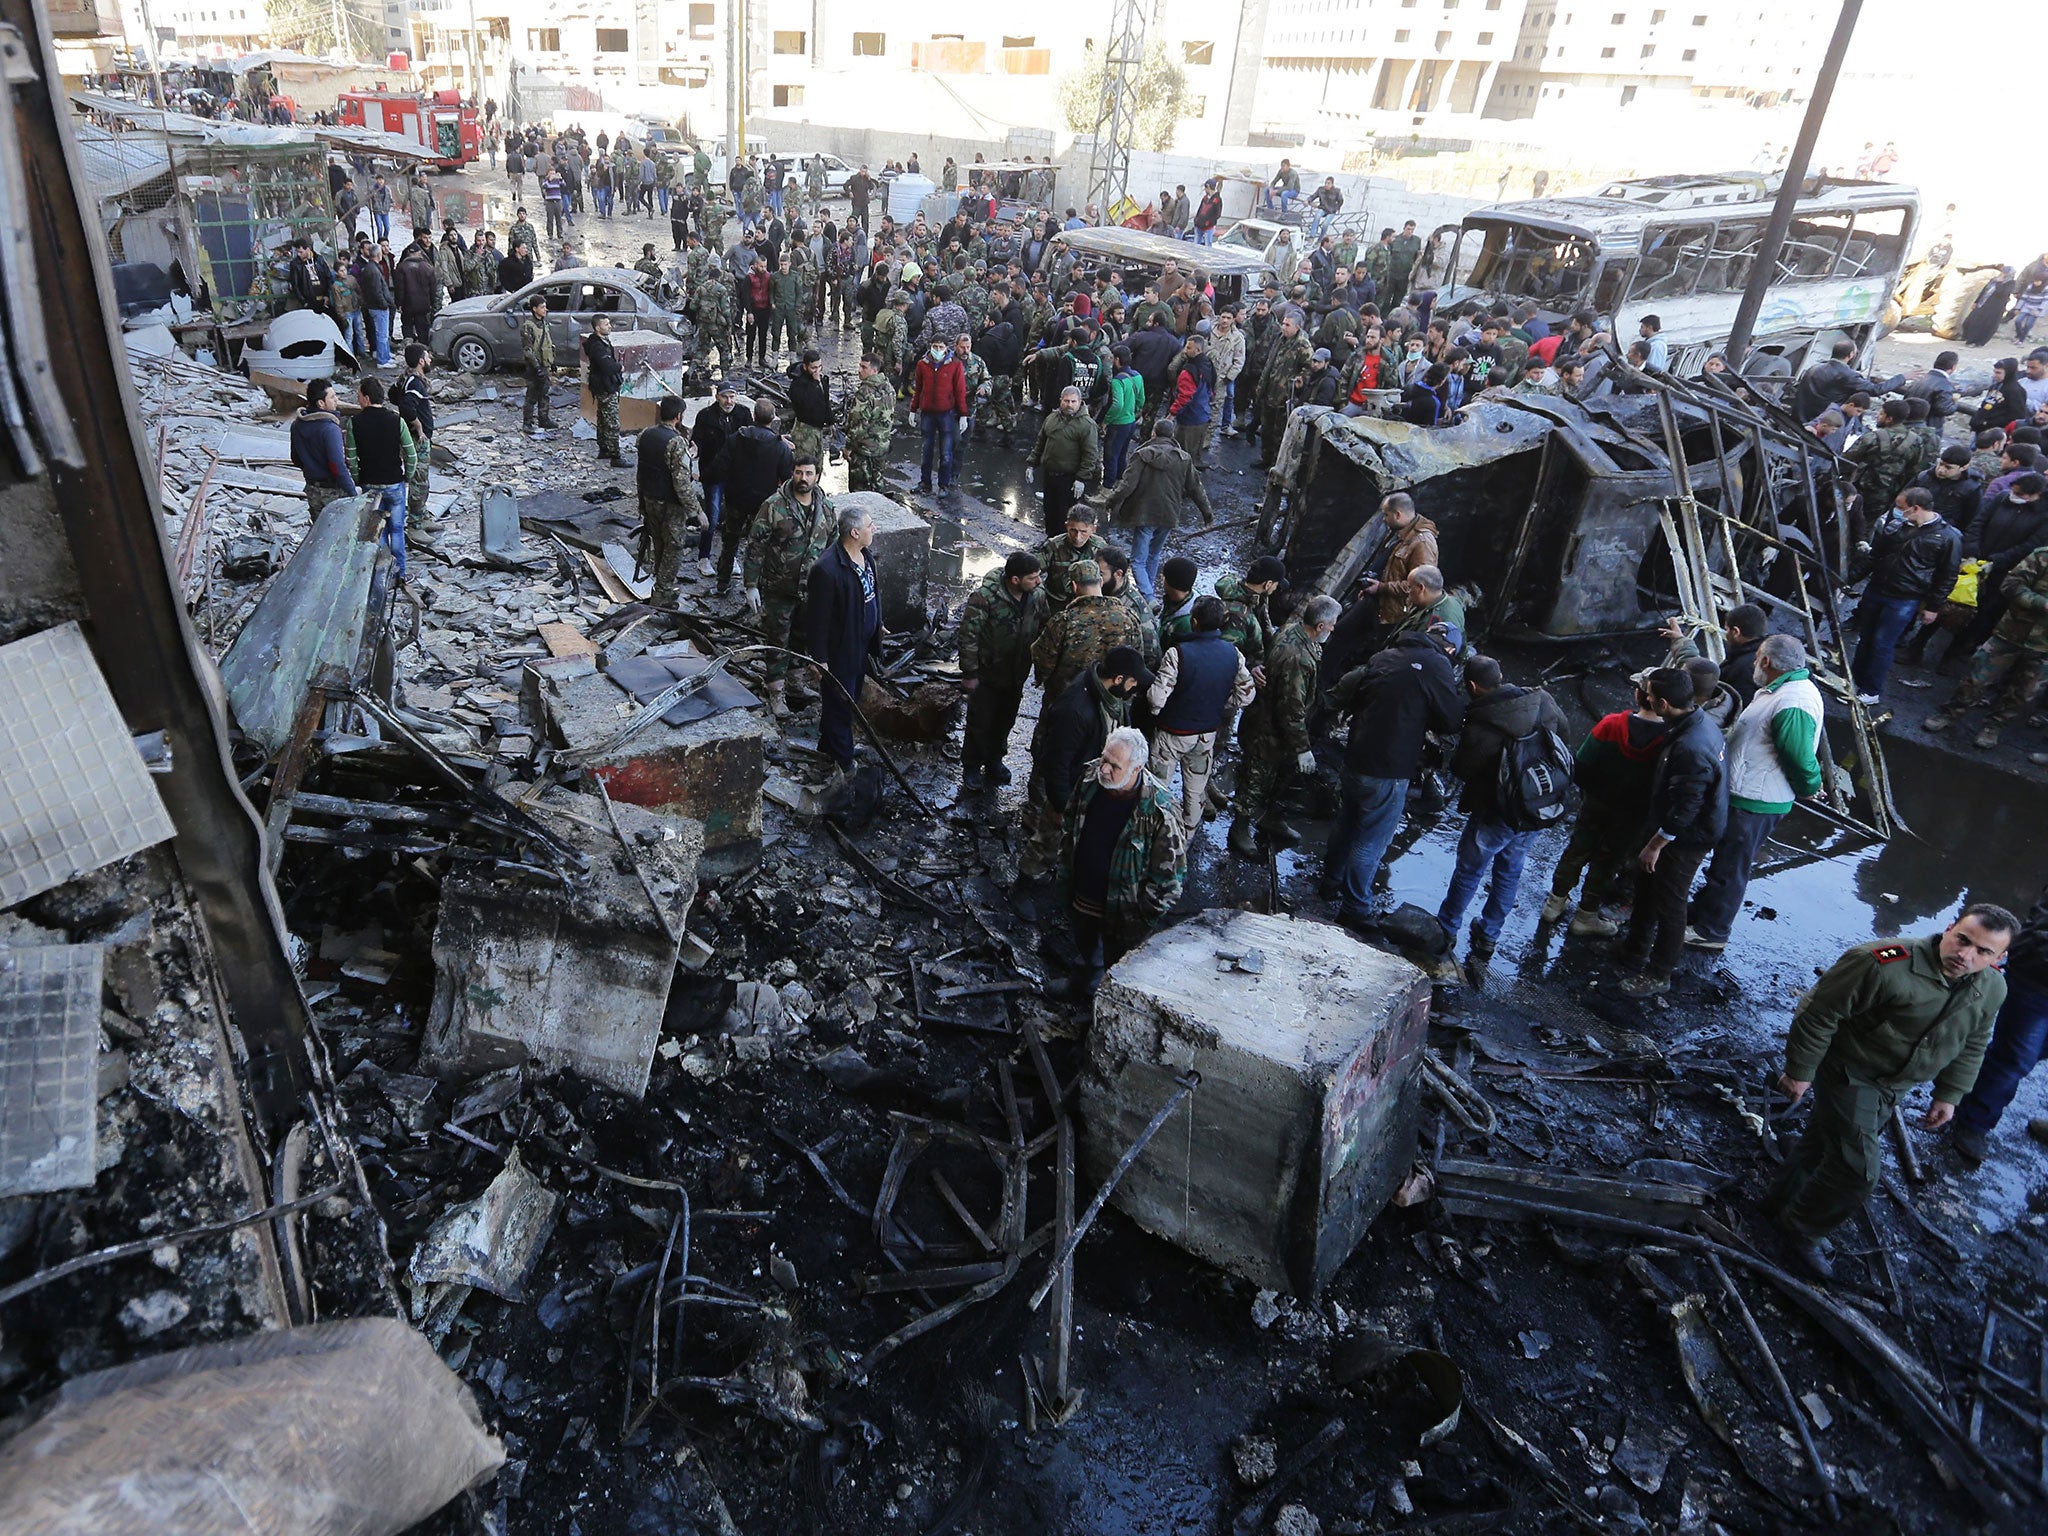 Syrian pro-government forces and residents gather at the site of previous suicide bombings in the area of a revered Shiite shrine in the town of Sayyida Zeinab, on the outskirts of the capital Damascus, on 31 January, 2016